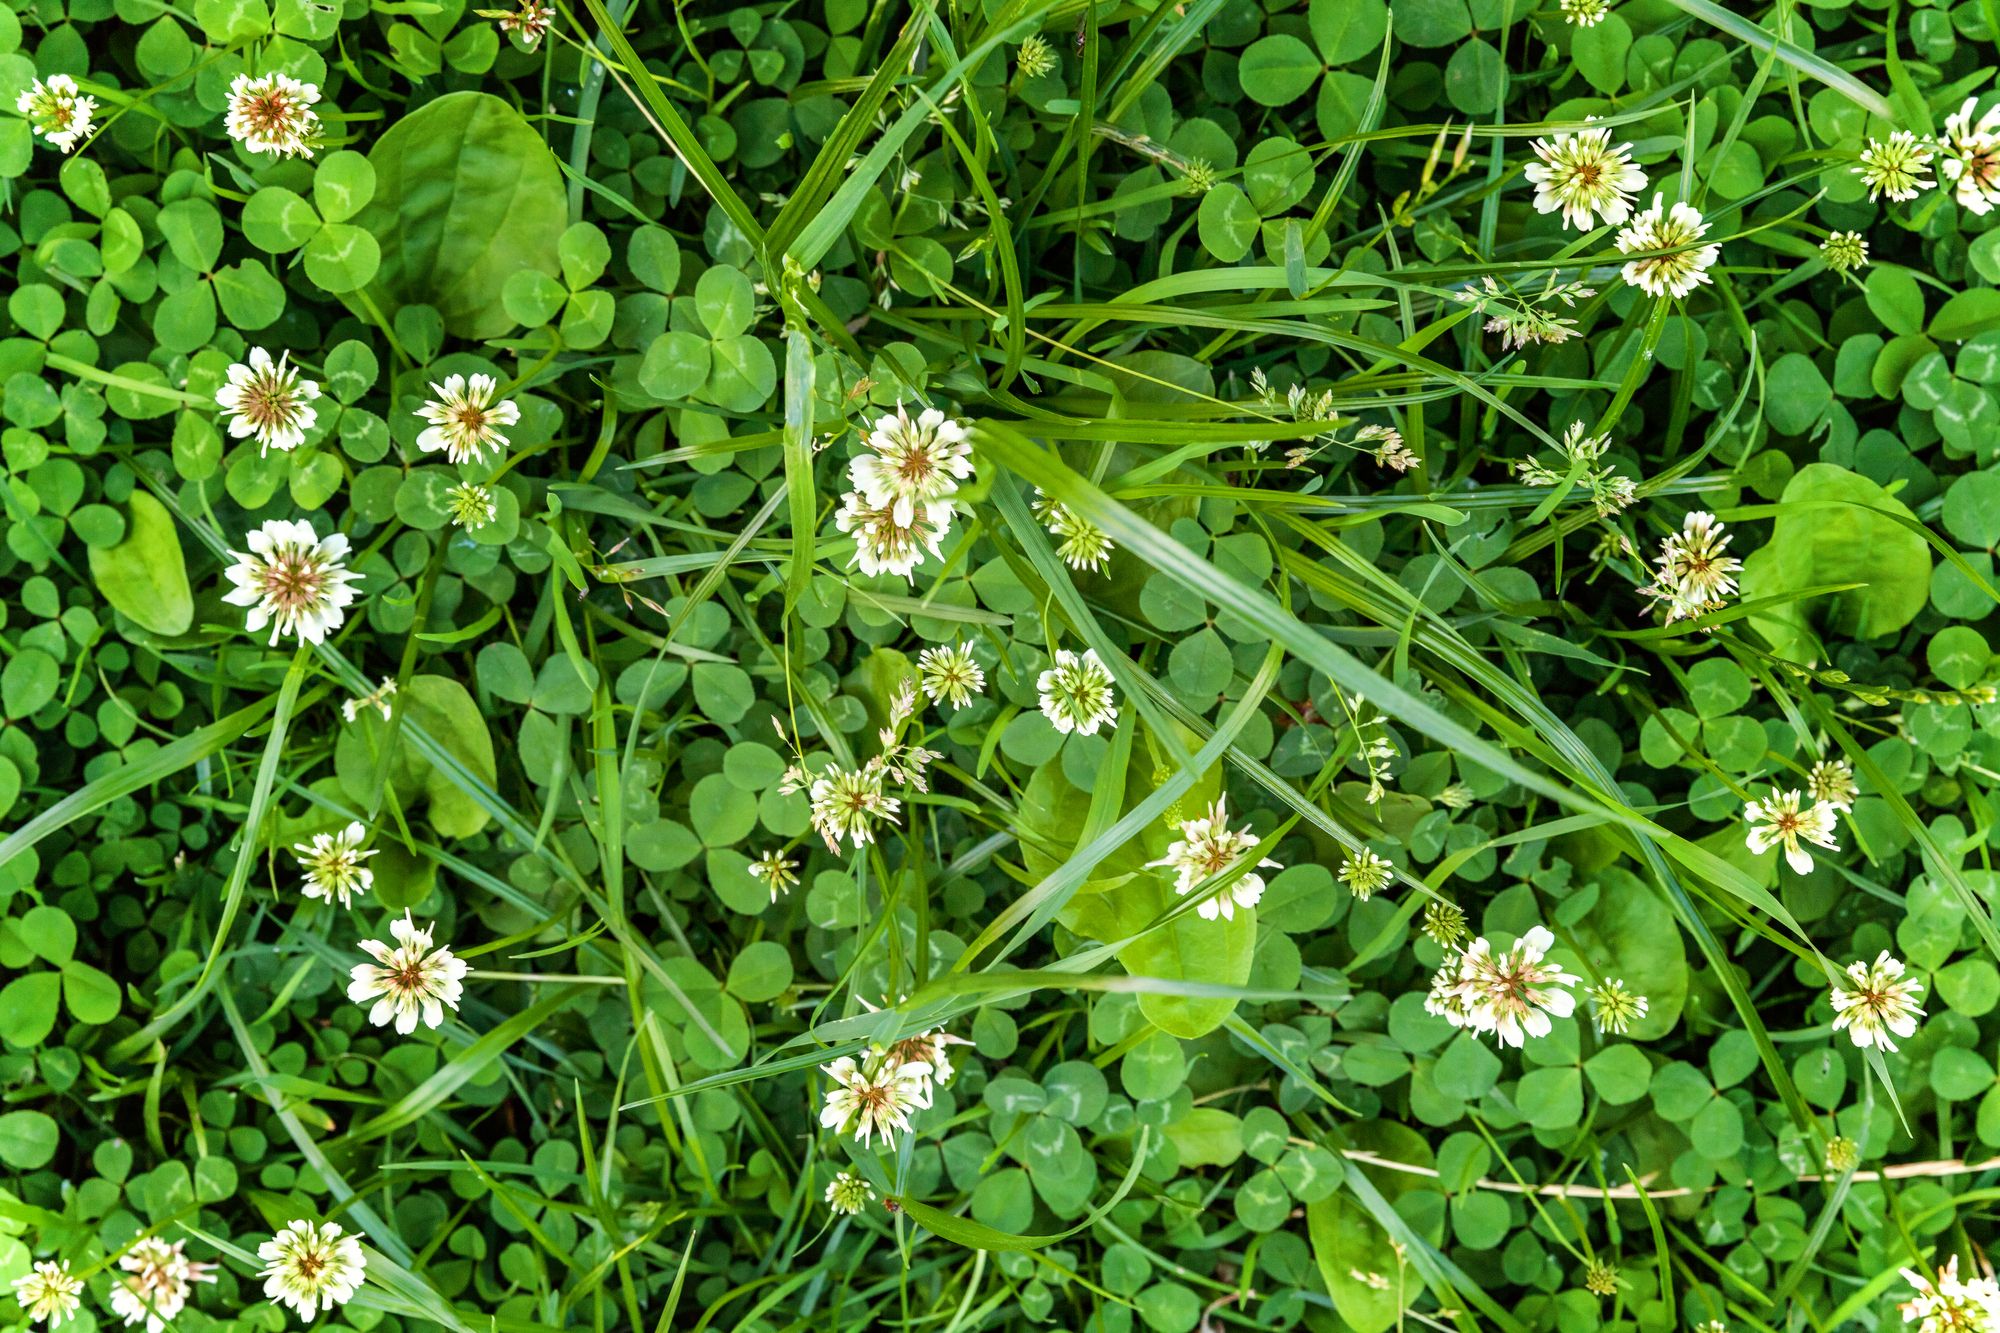 How to get rid of clover